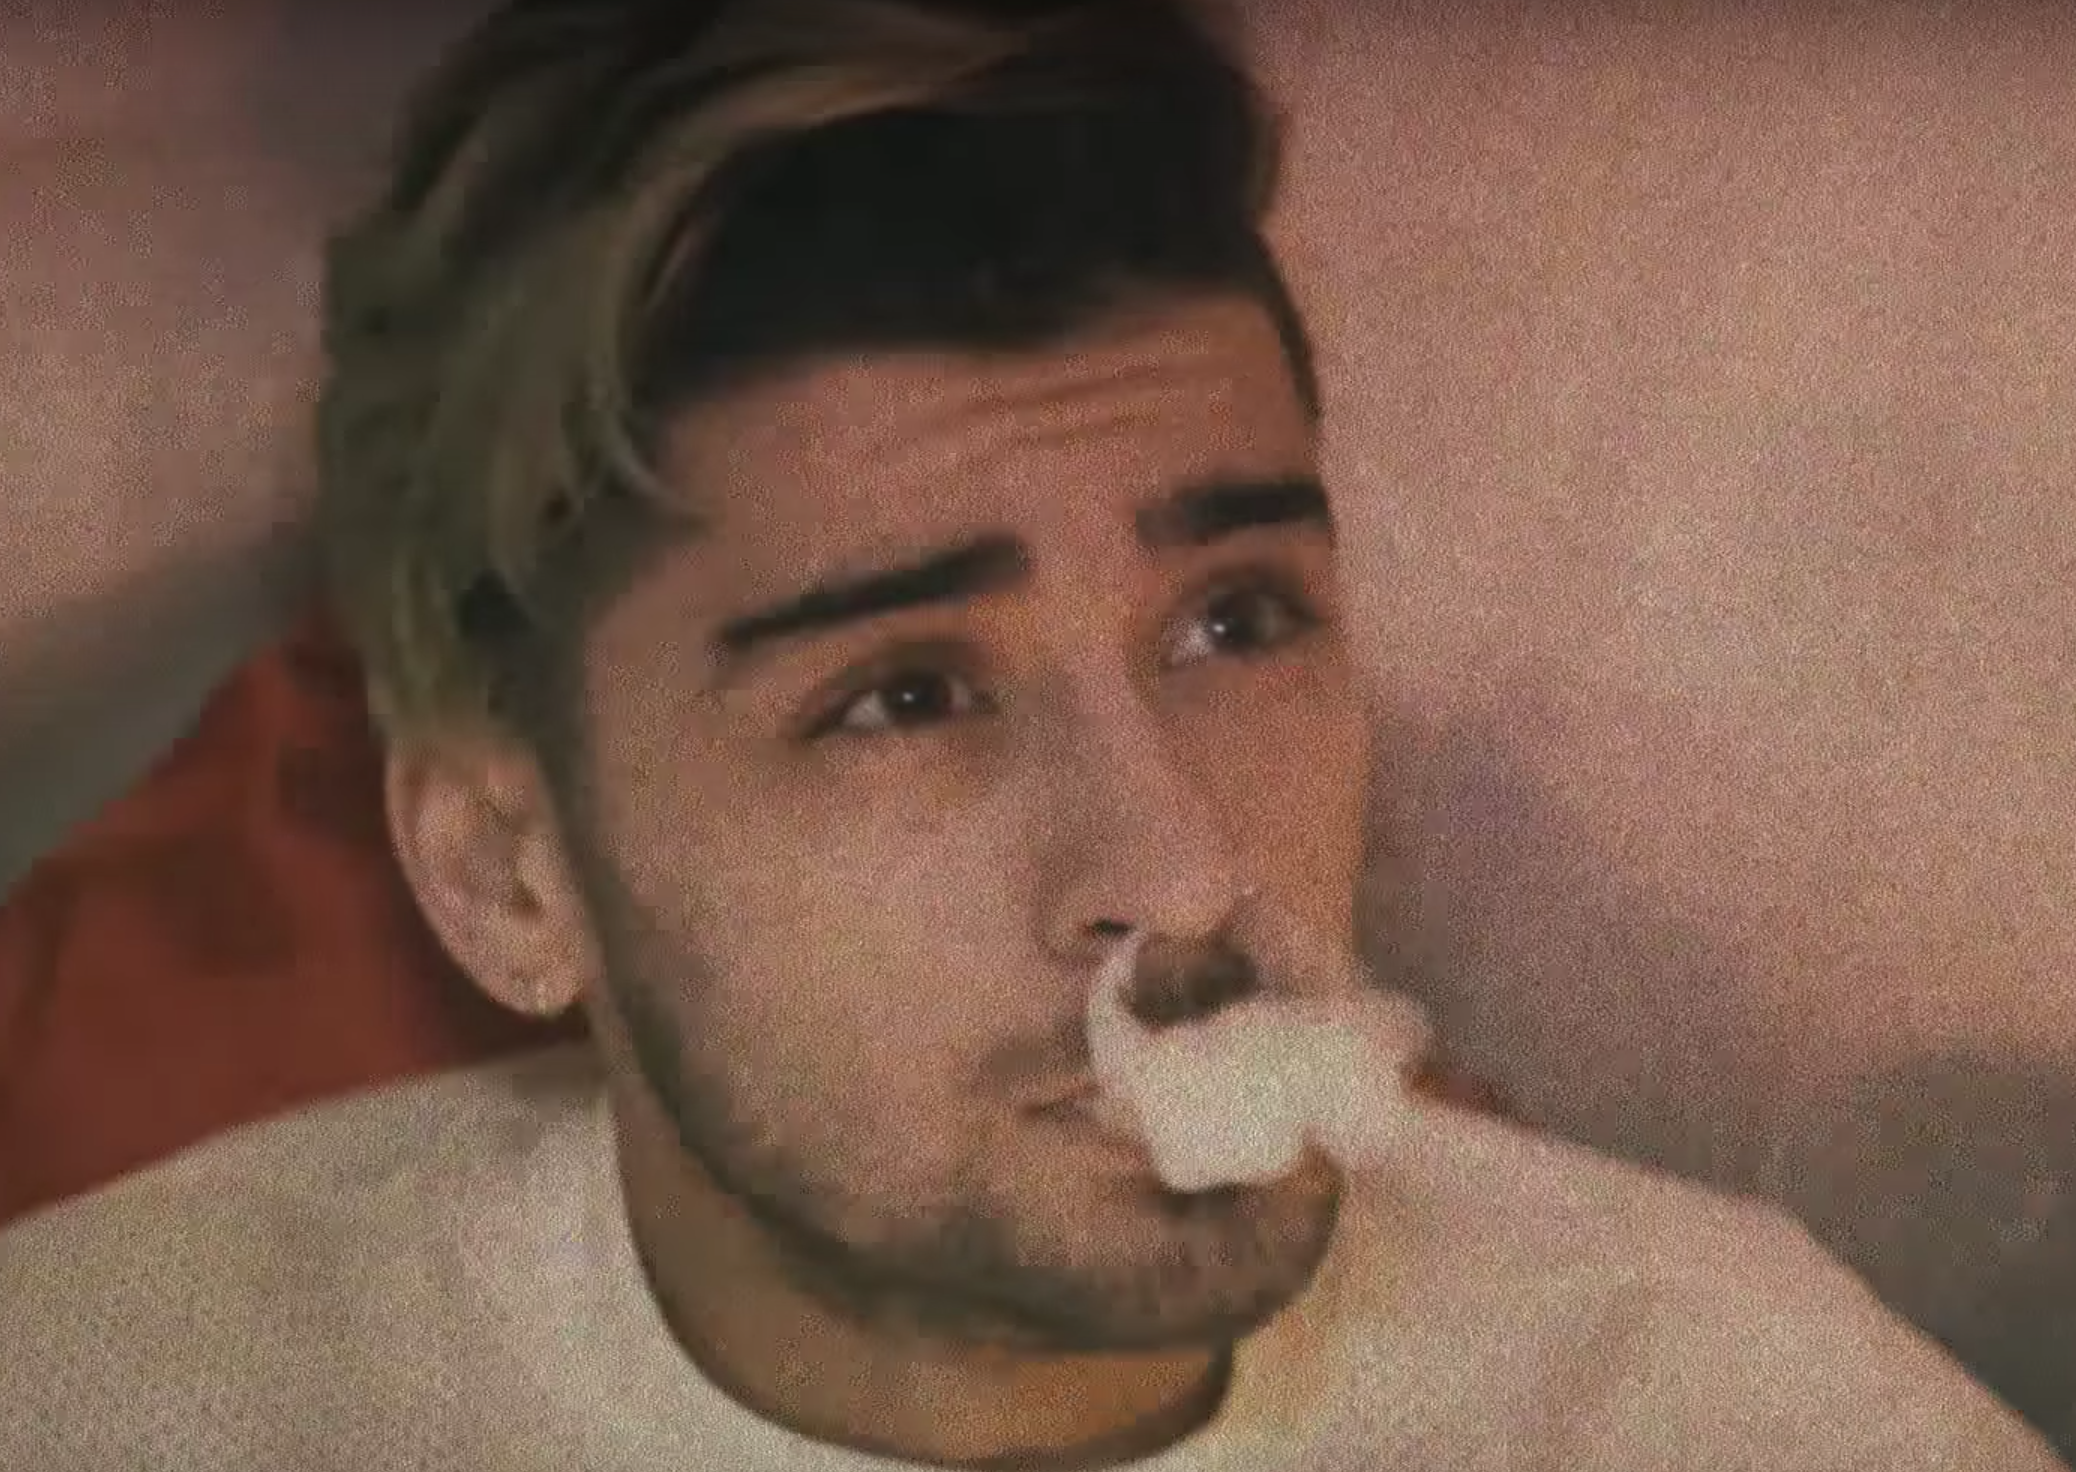 Watch a New NSFW Video Zayn for Got Time" ft. PARTYNEXTDOOR